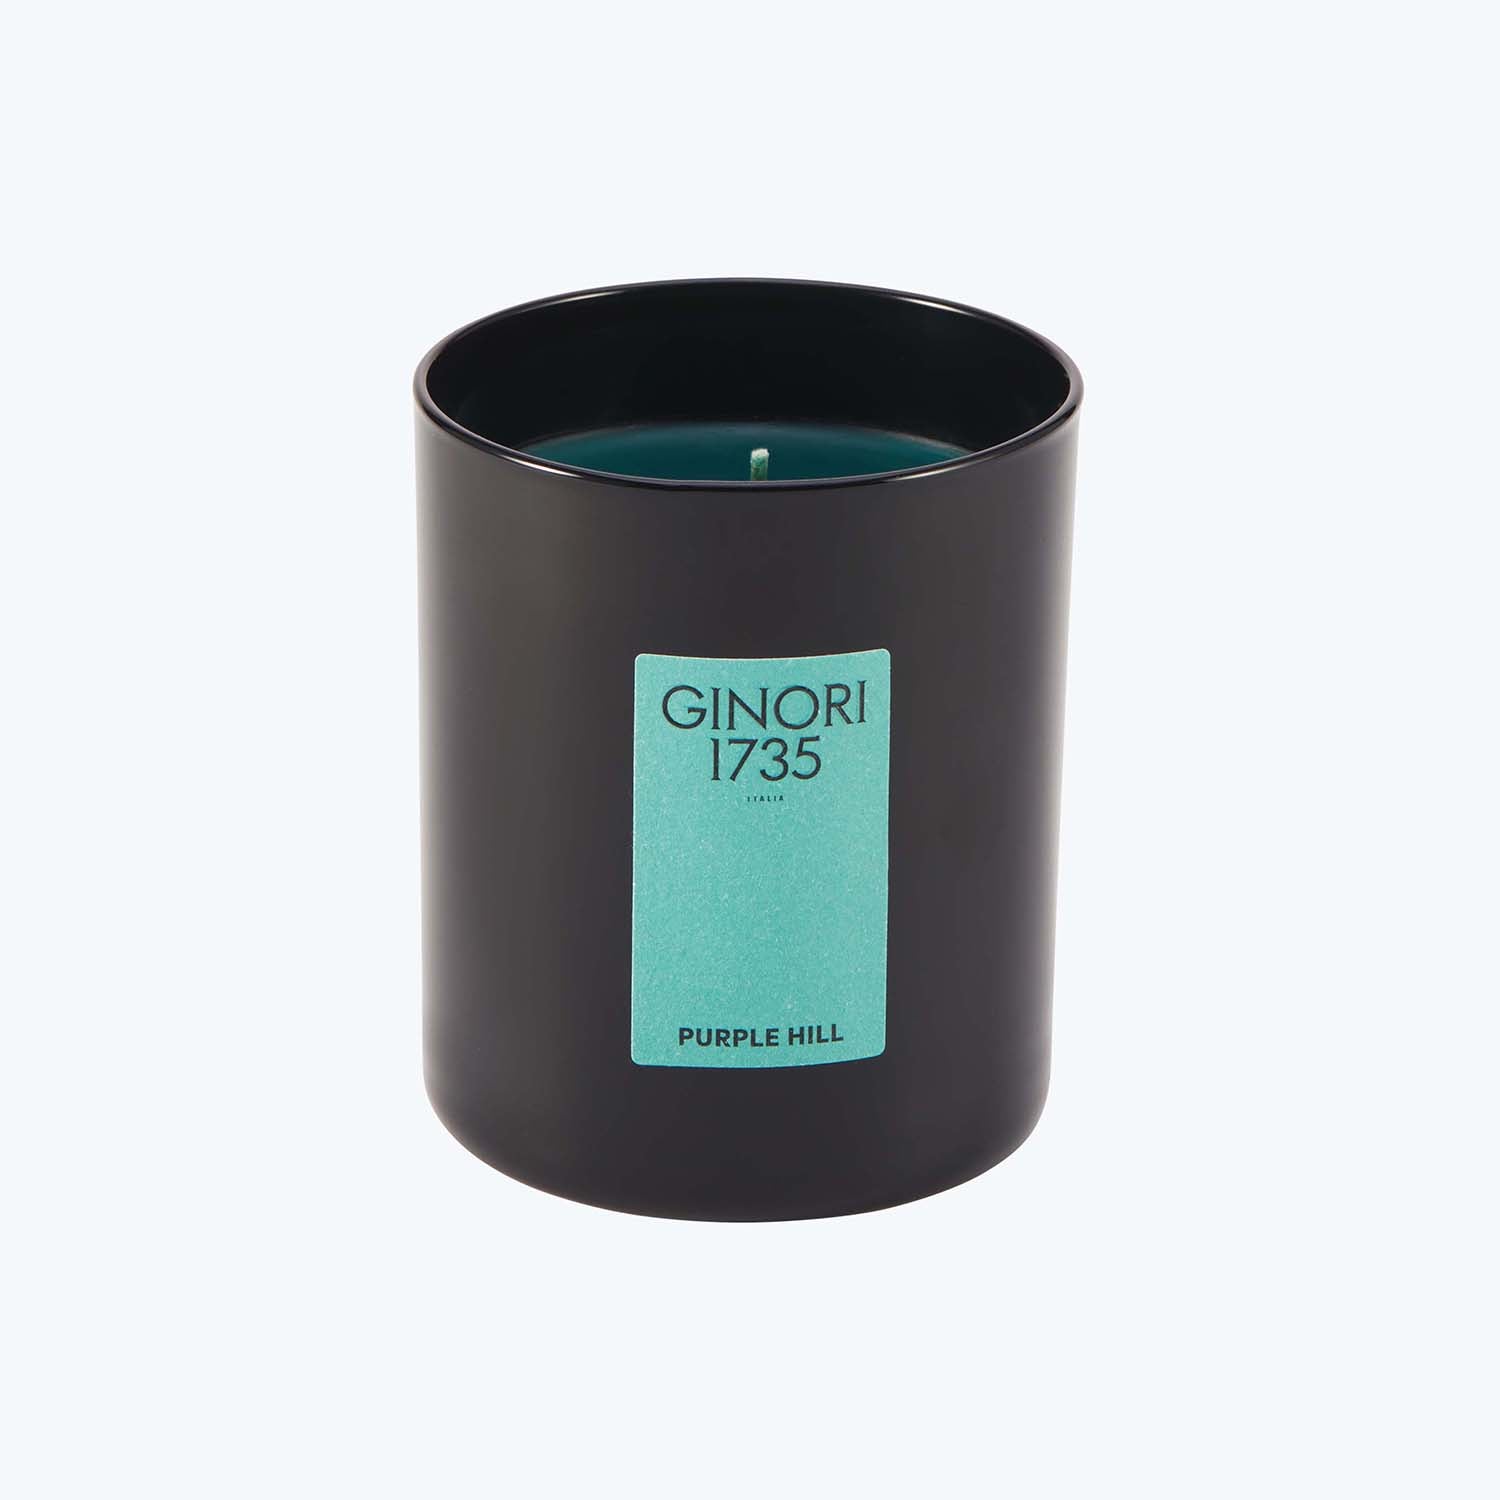 Luxurious scented candle in dark container, labeled 'GINORI 1735 - PURPLE HILL'.